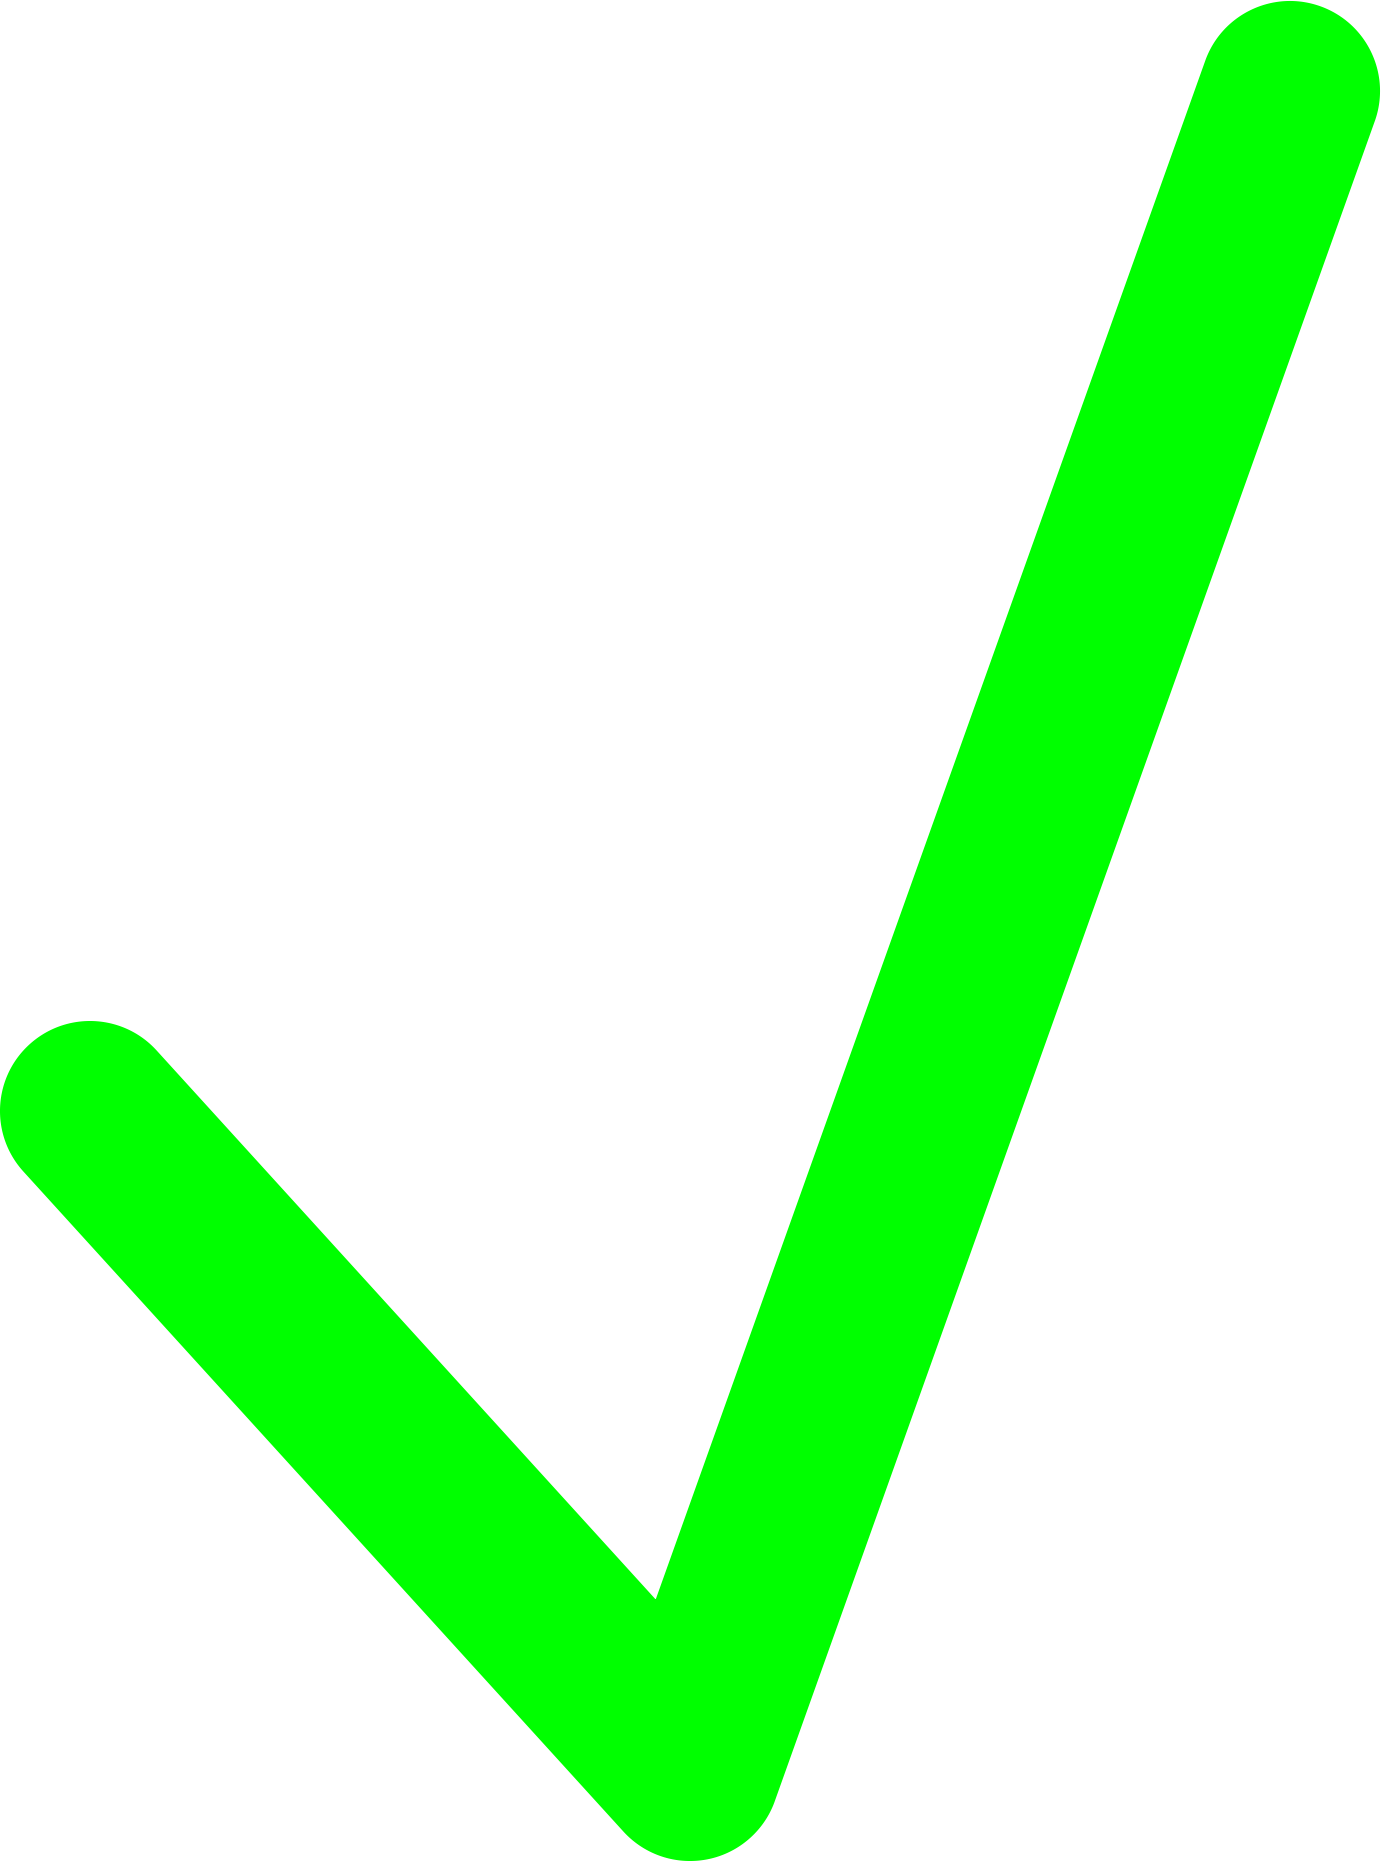 Green Check Mark Transparent Images